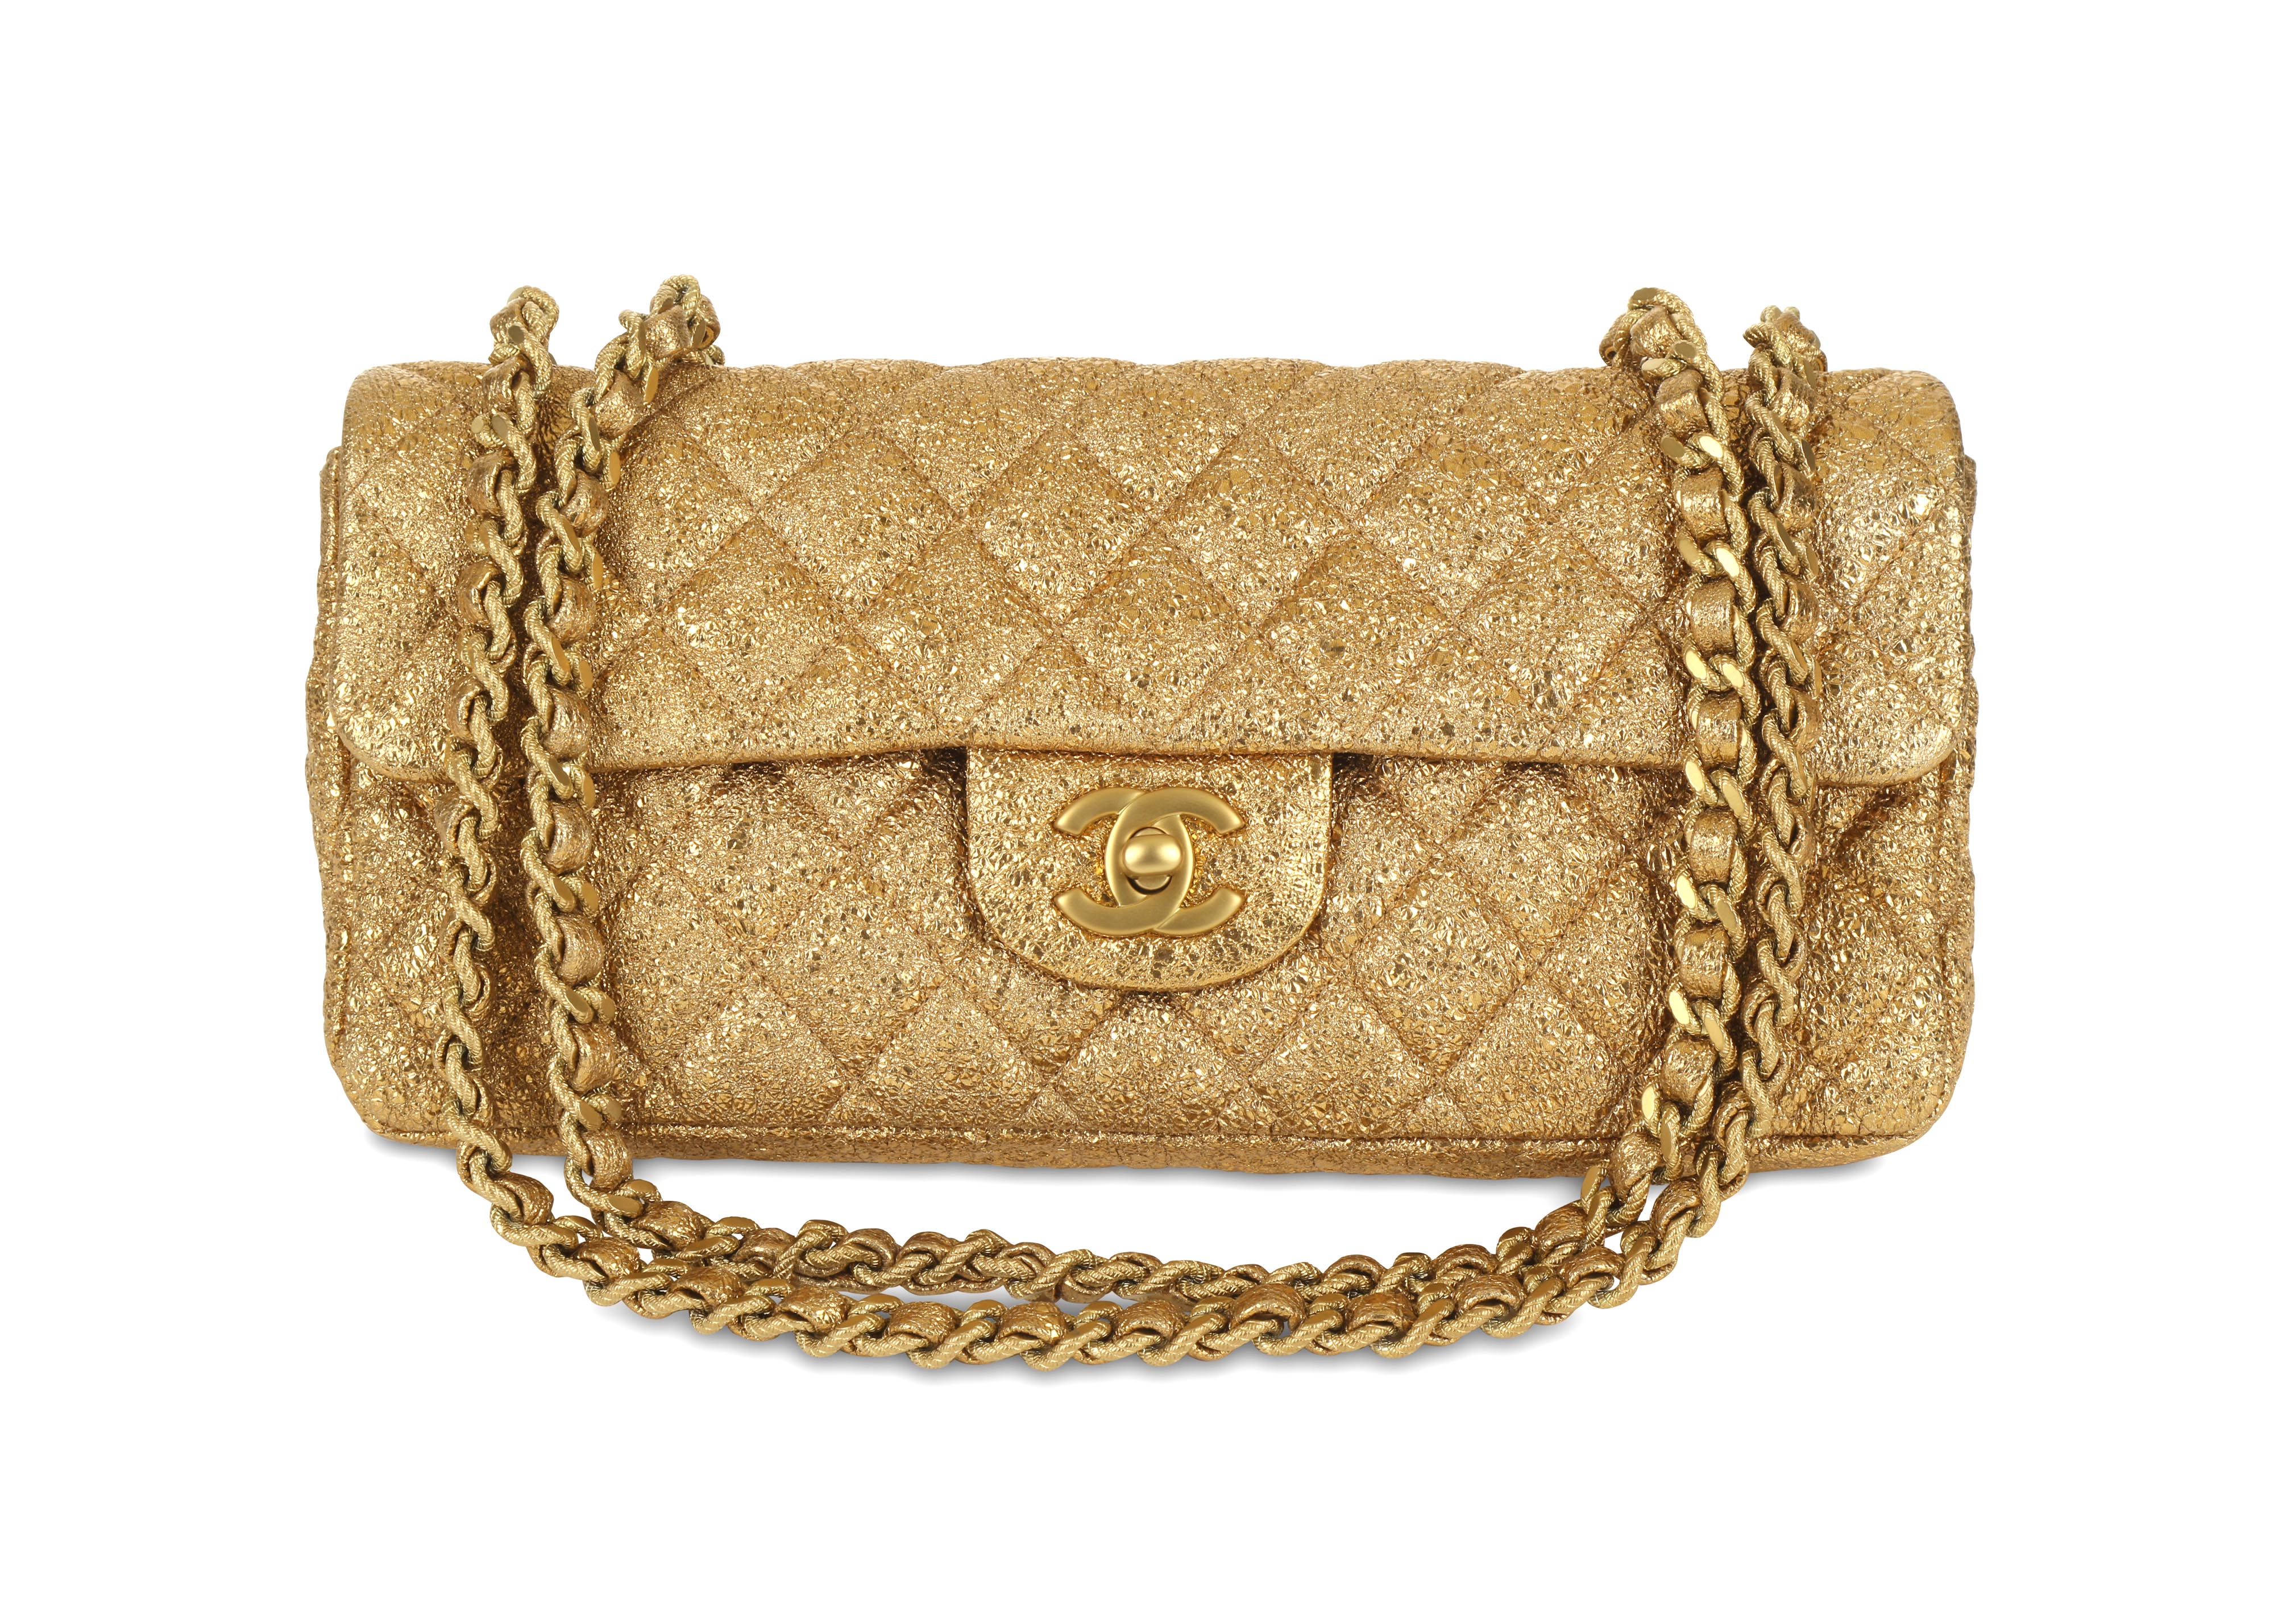 Chanel 2008 Limited Edition Gold Jewel East West Flap Bag